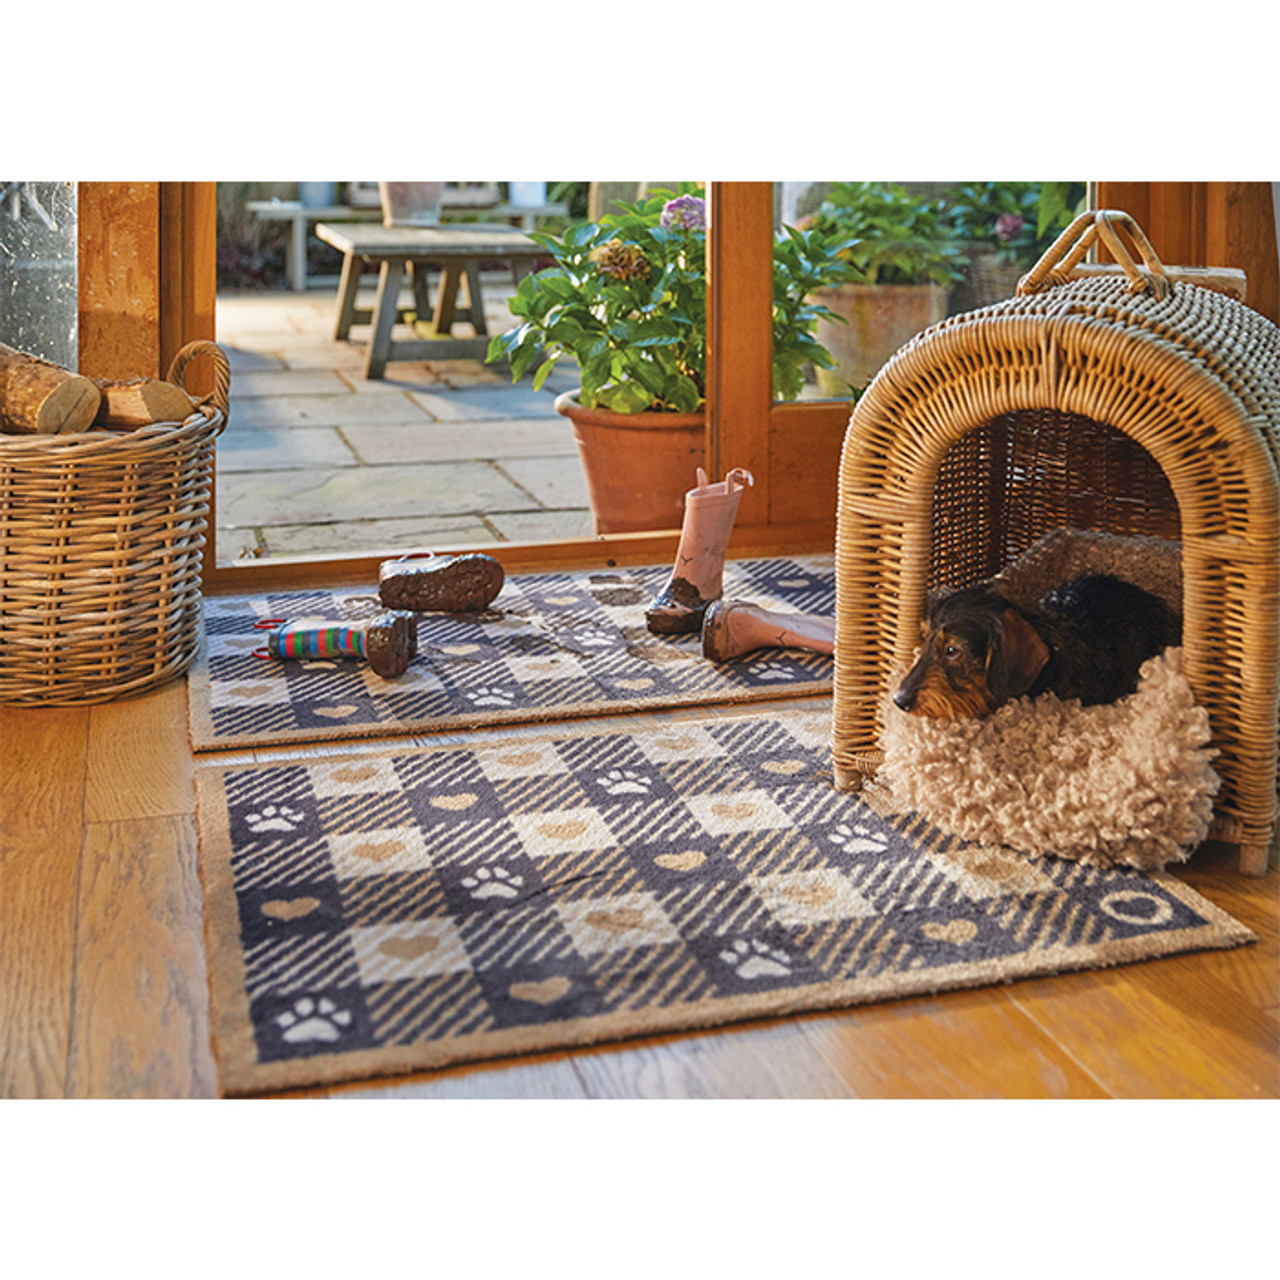 Pet Check 1 Mat 65x85cm *in-store